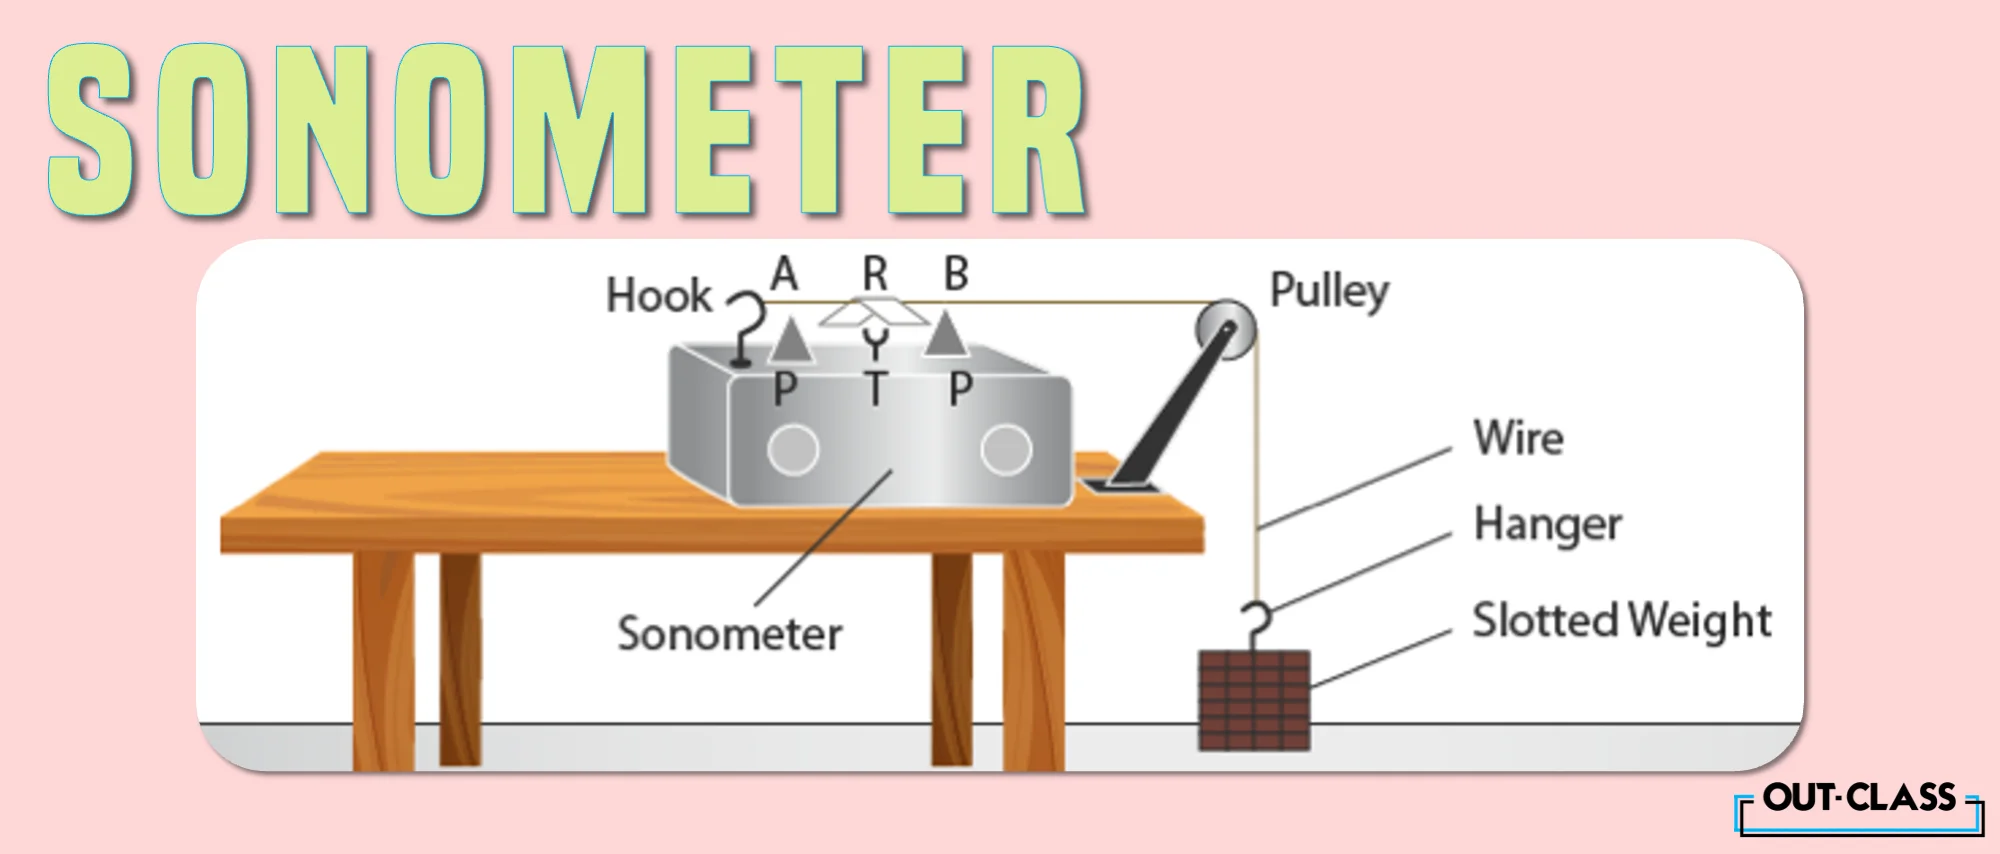 it illustrates what is a sonometer and shows its usage as well as defines the sonometer definition in physics and how it is an instrument to measure sound intensity 